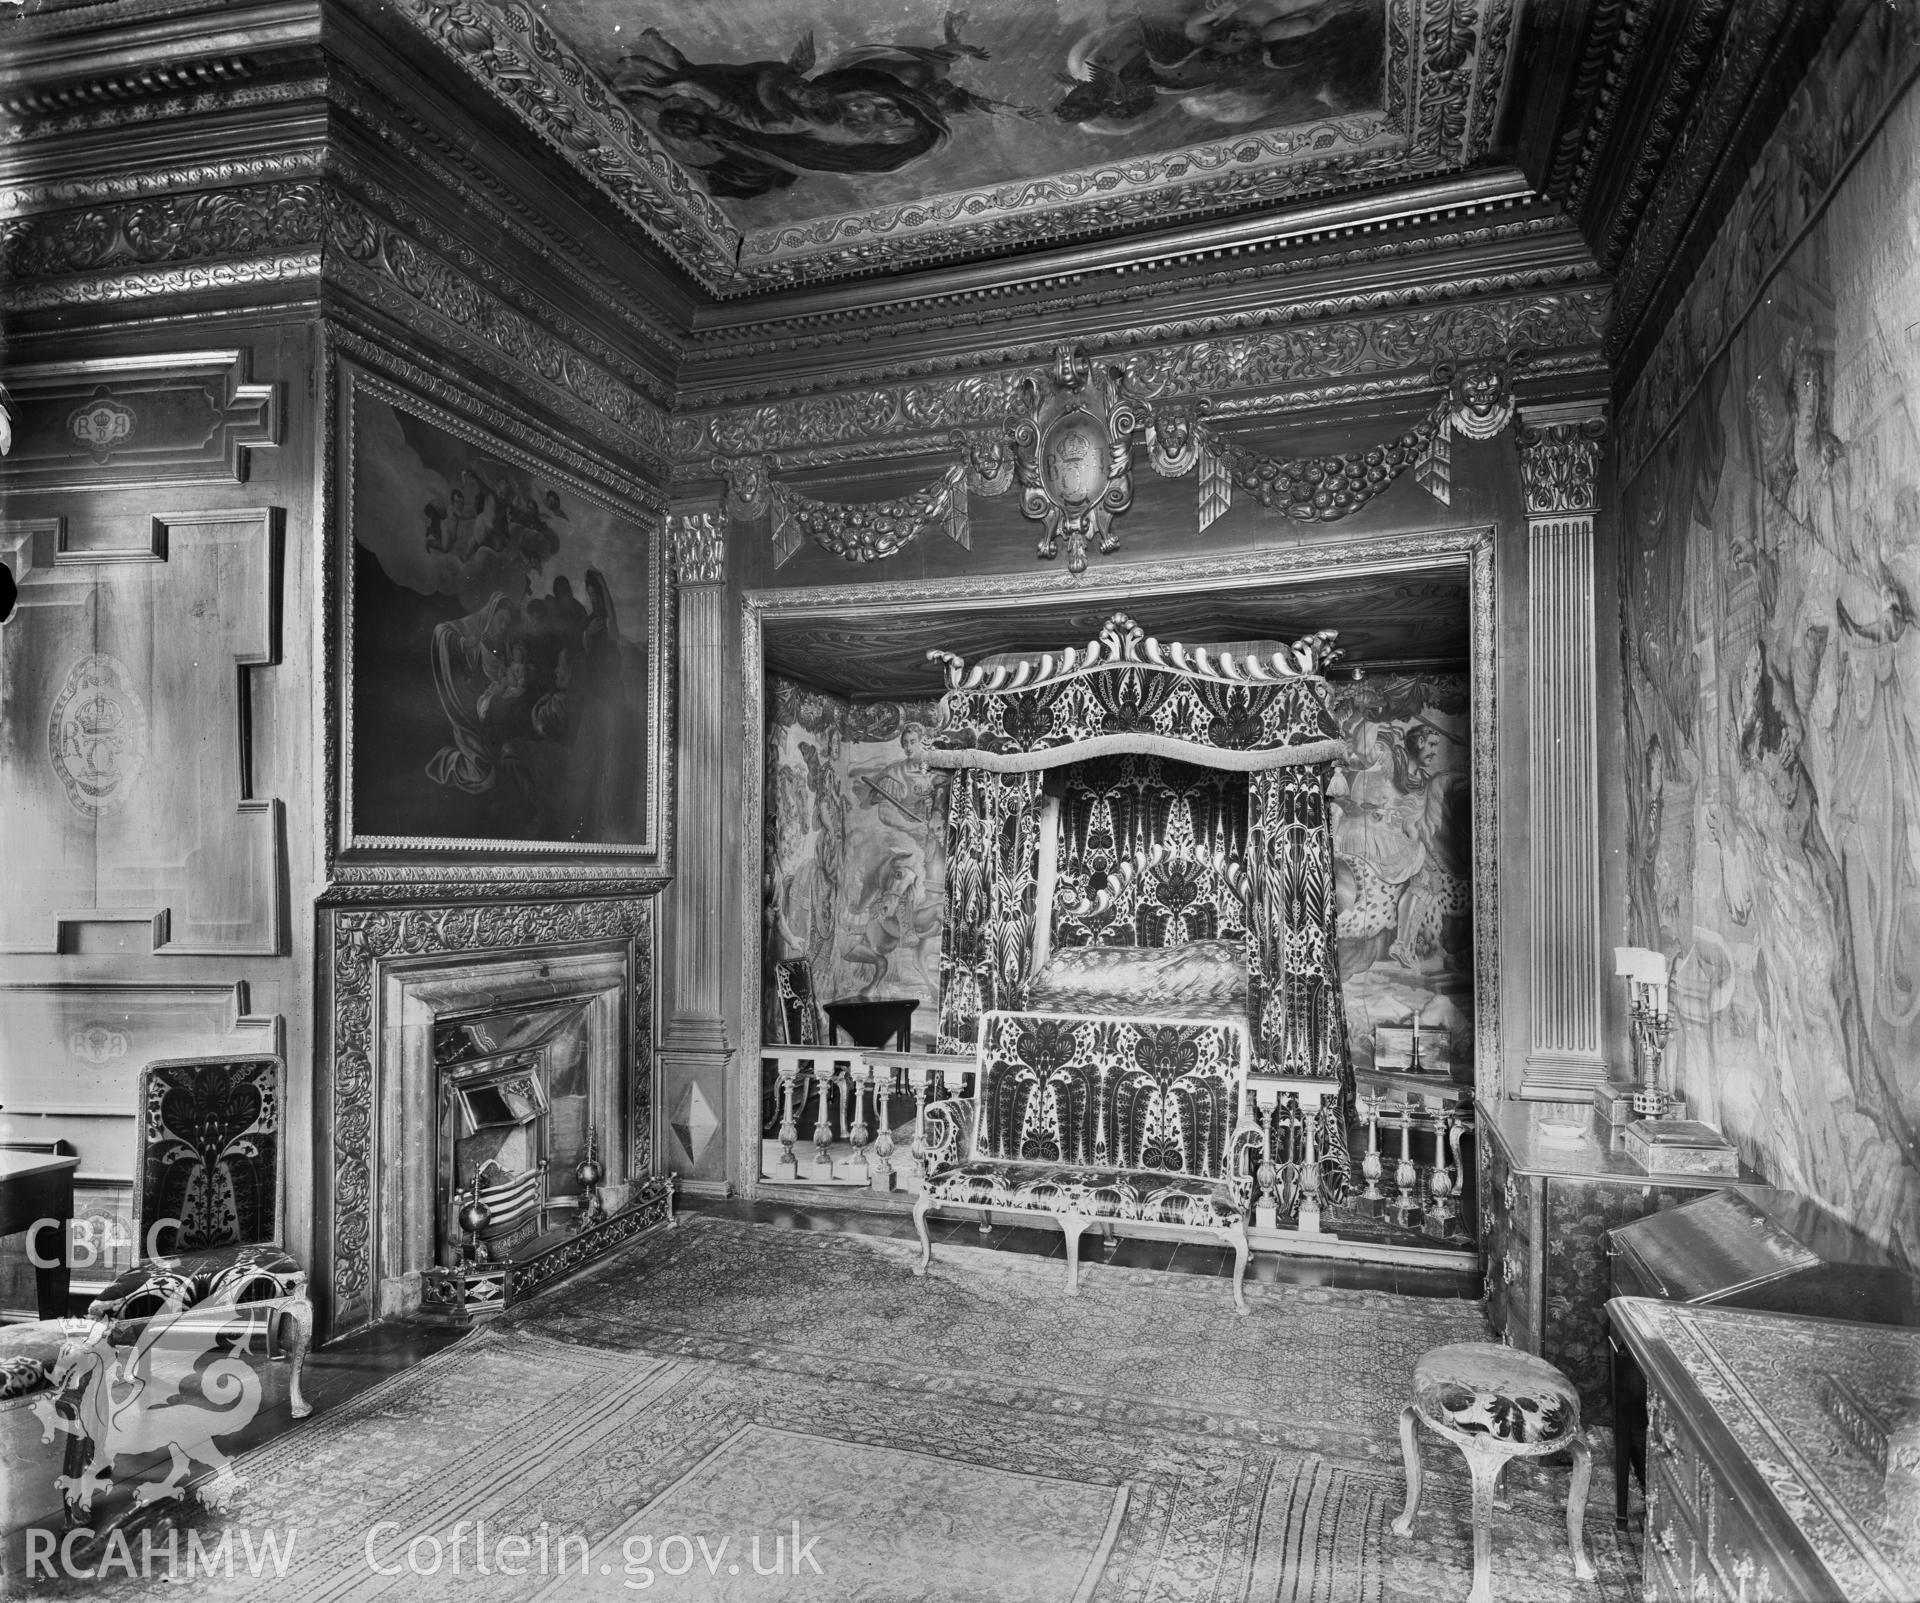 Interior view of Powys Castle showing state bedroom.